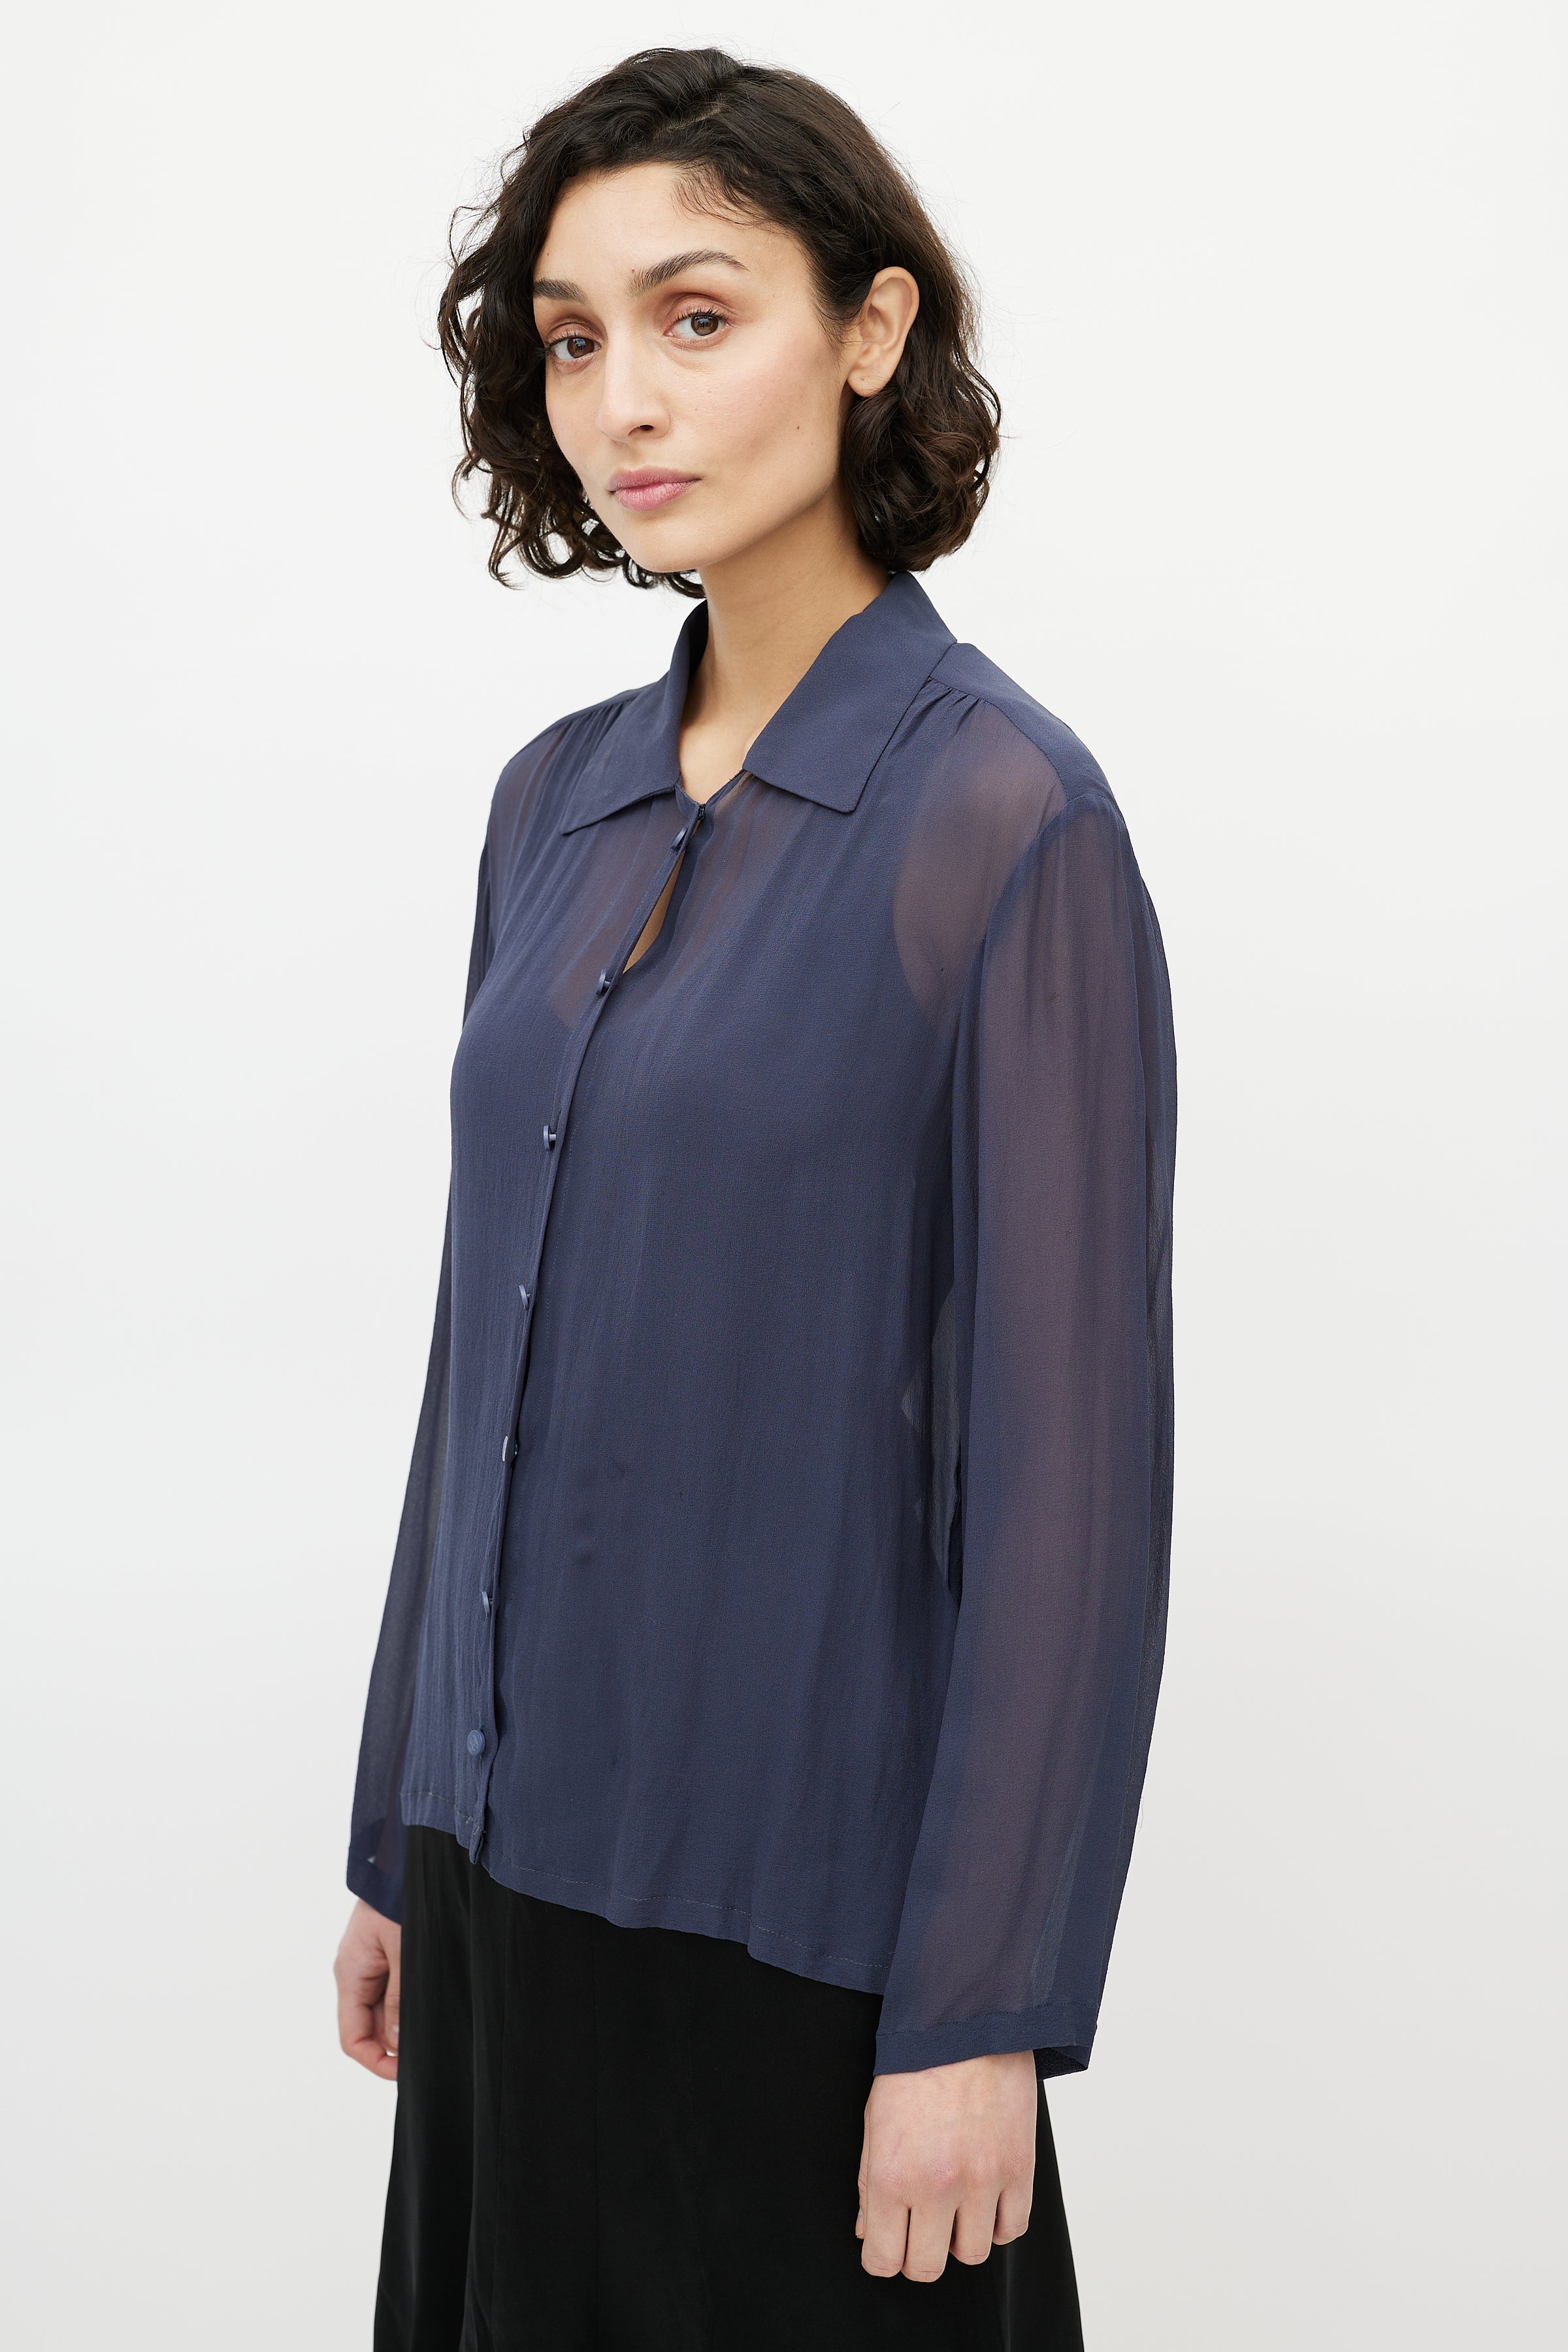 Chanel // Navy Sheer – Blouse Scarf VSP Consignment